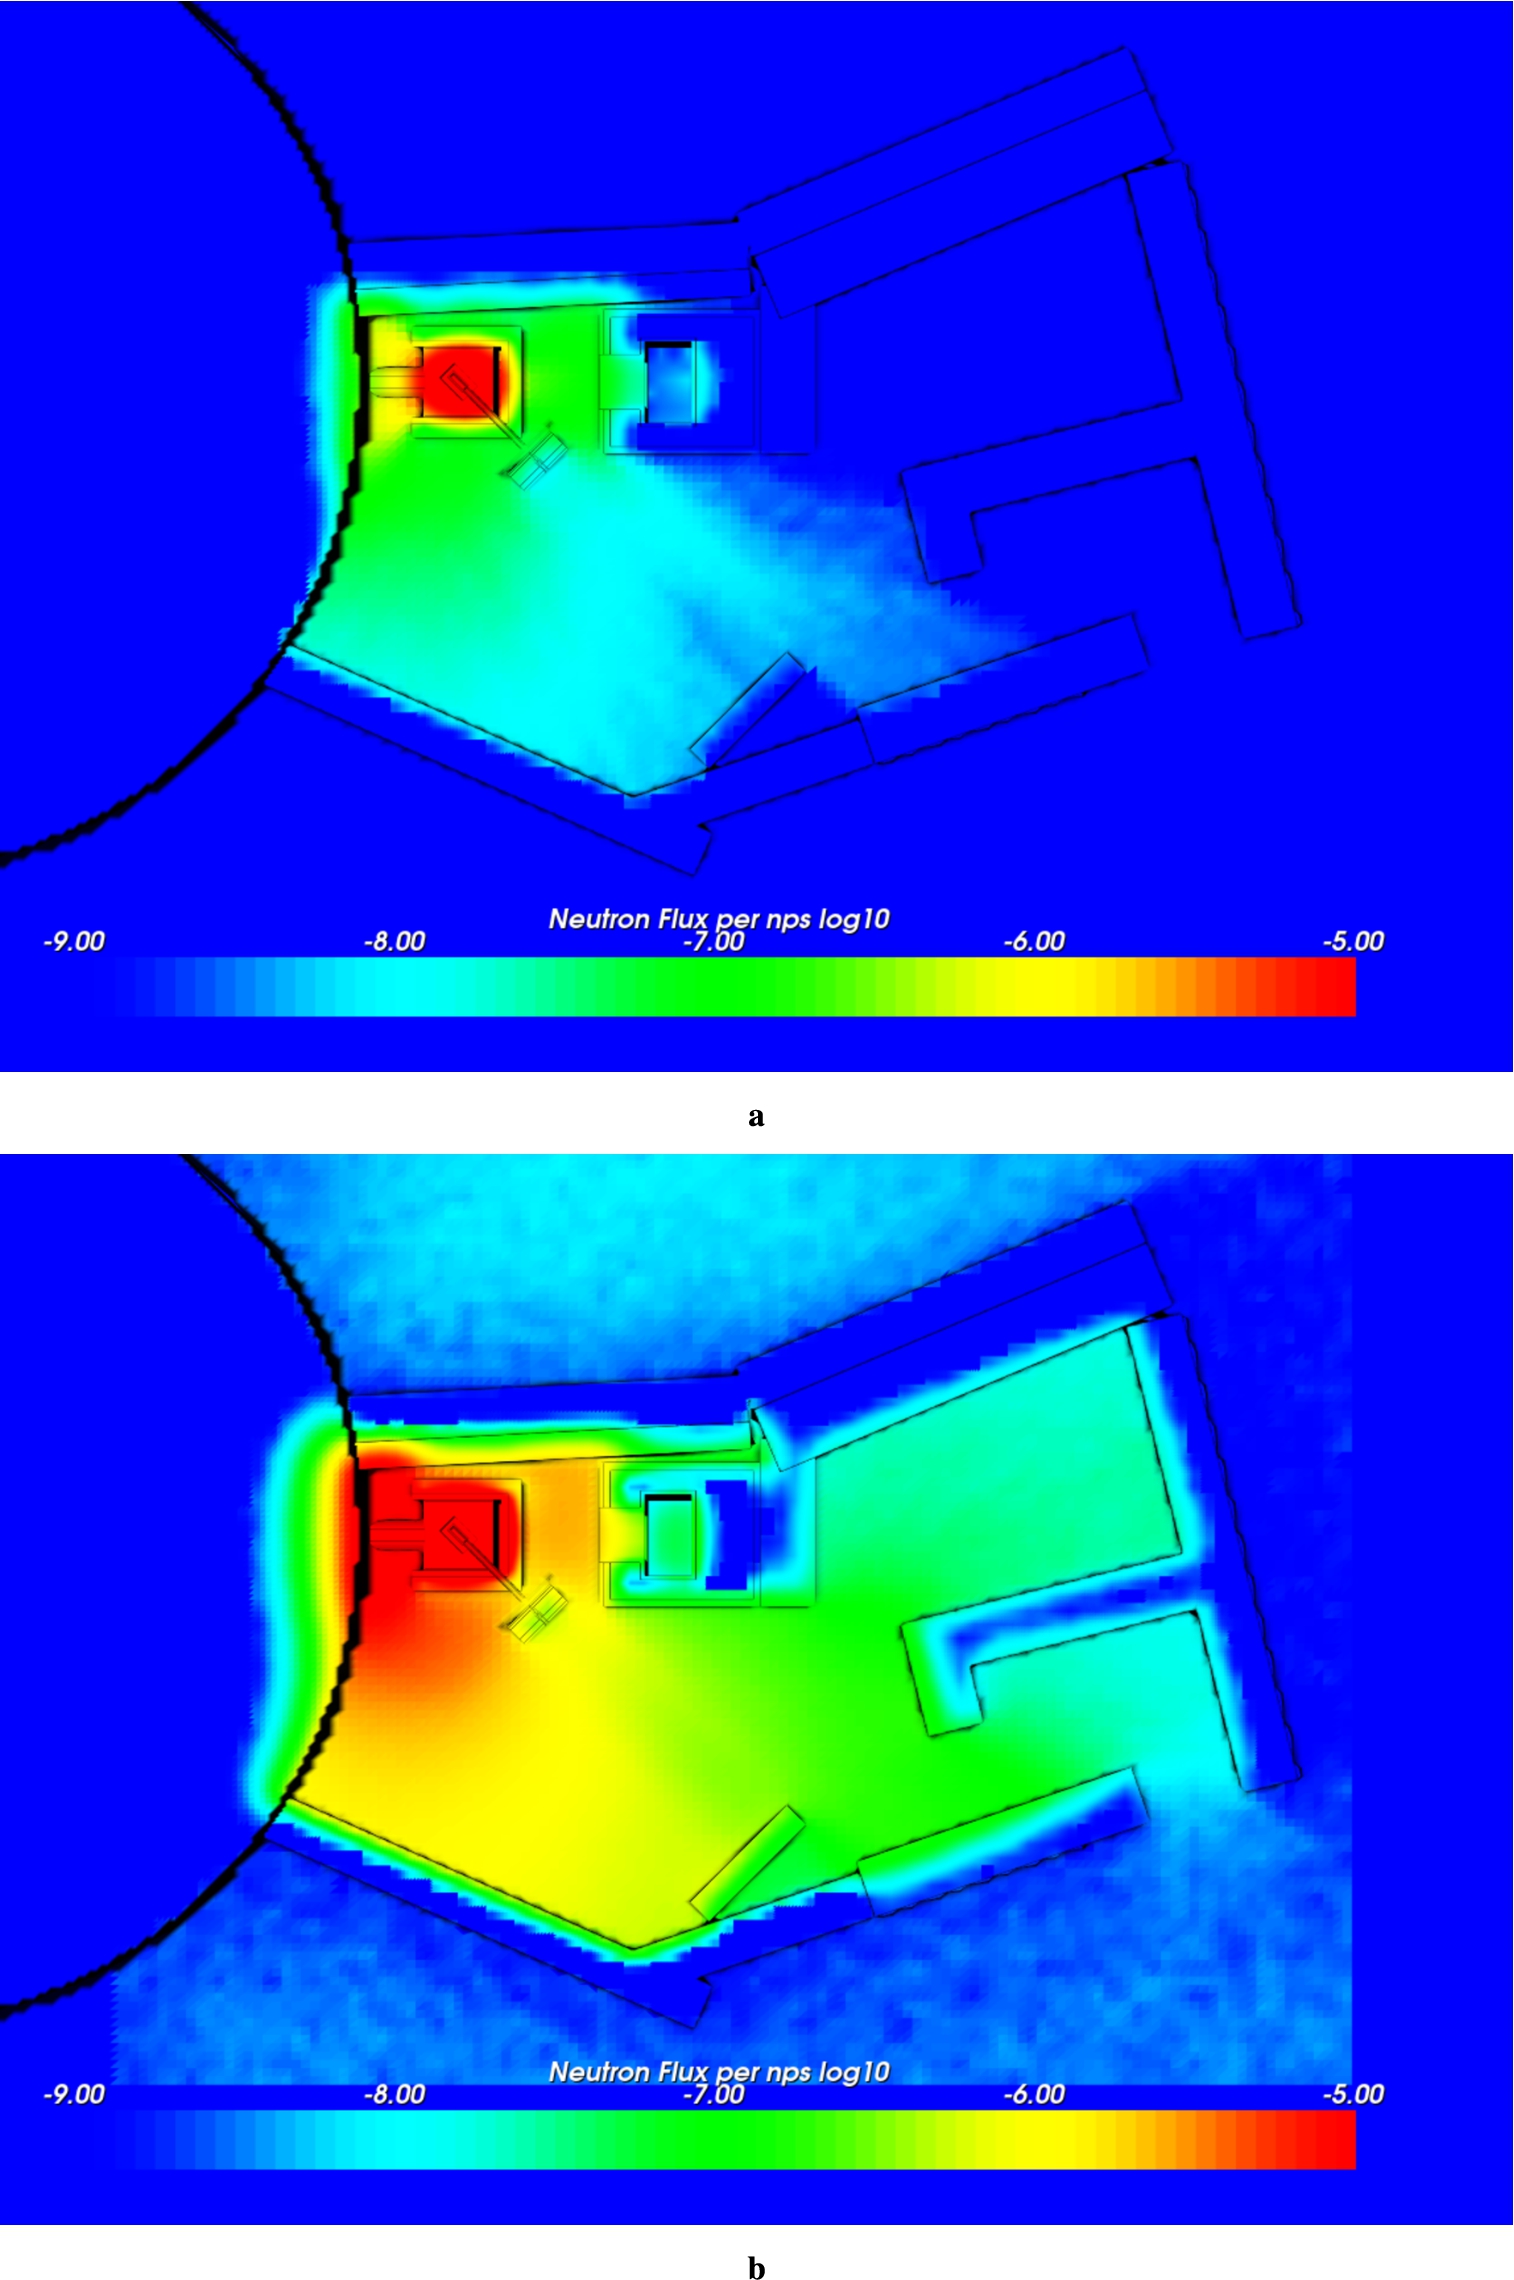 Neutron flux map at the moderator height with a spatial resolution of 10 cm × 10 cm × 10 cm for (a) fast neutrons (1 MeV to 100 MeV) (b) epithermal neutrons (81.8 meV to 1 MeV). Units are n/cm2/nps in log scale.